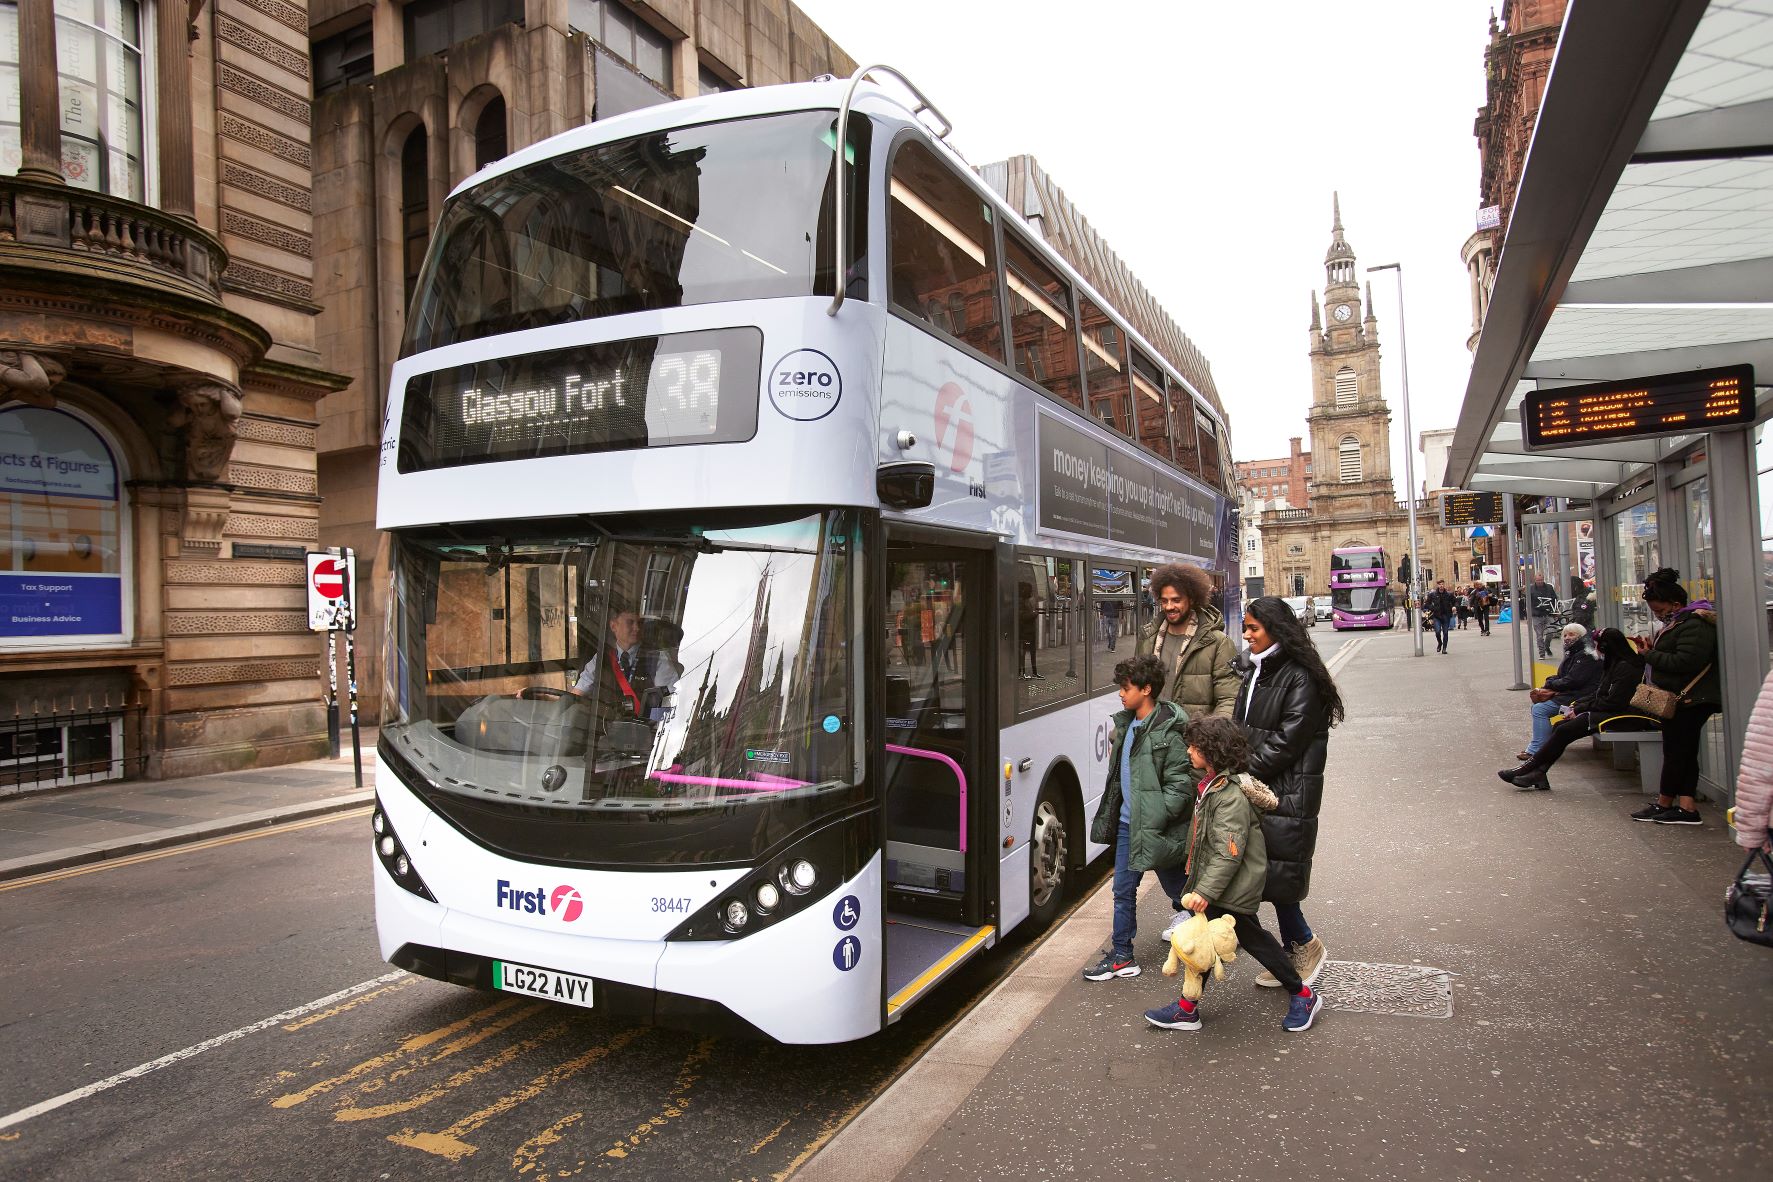 More would use bus if they knew green benefits – First study